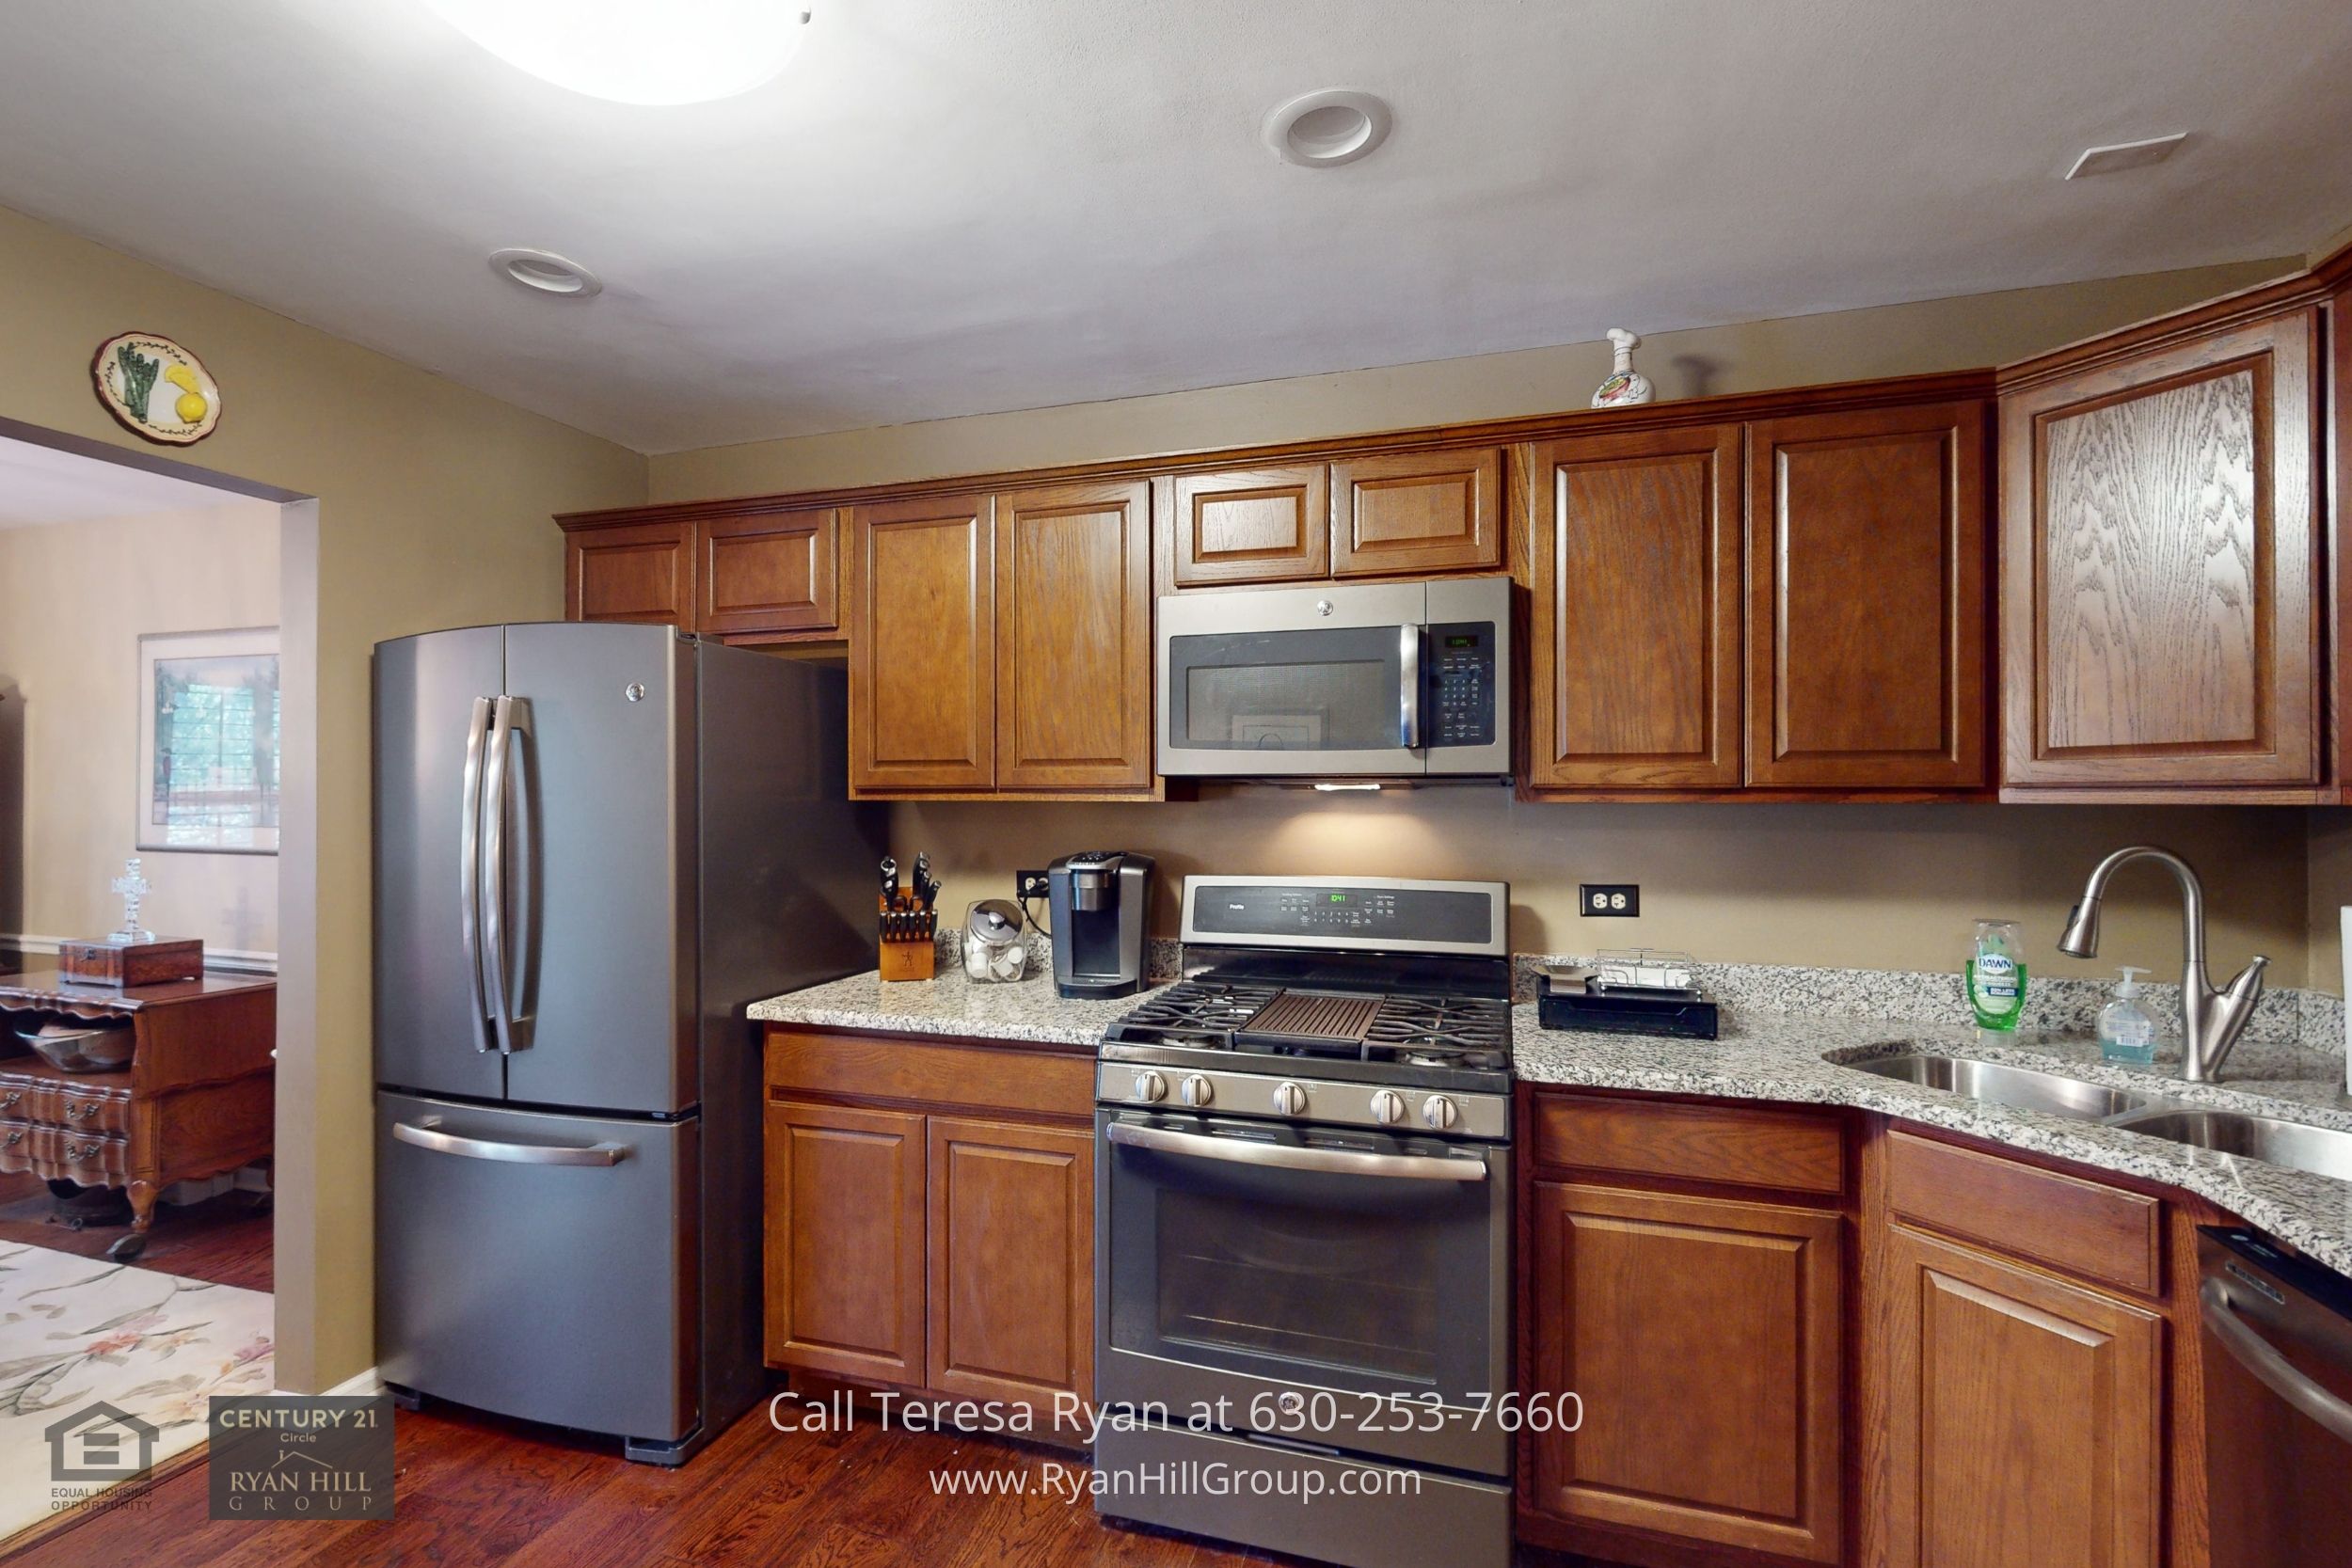 This lovely townhome in Winfield IL has a gourmet kitchen has GE stainless steel appliances, a gas cooktop with five burners, and a stainless double sink all beautifully captured in this photo.